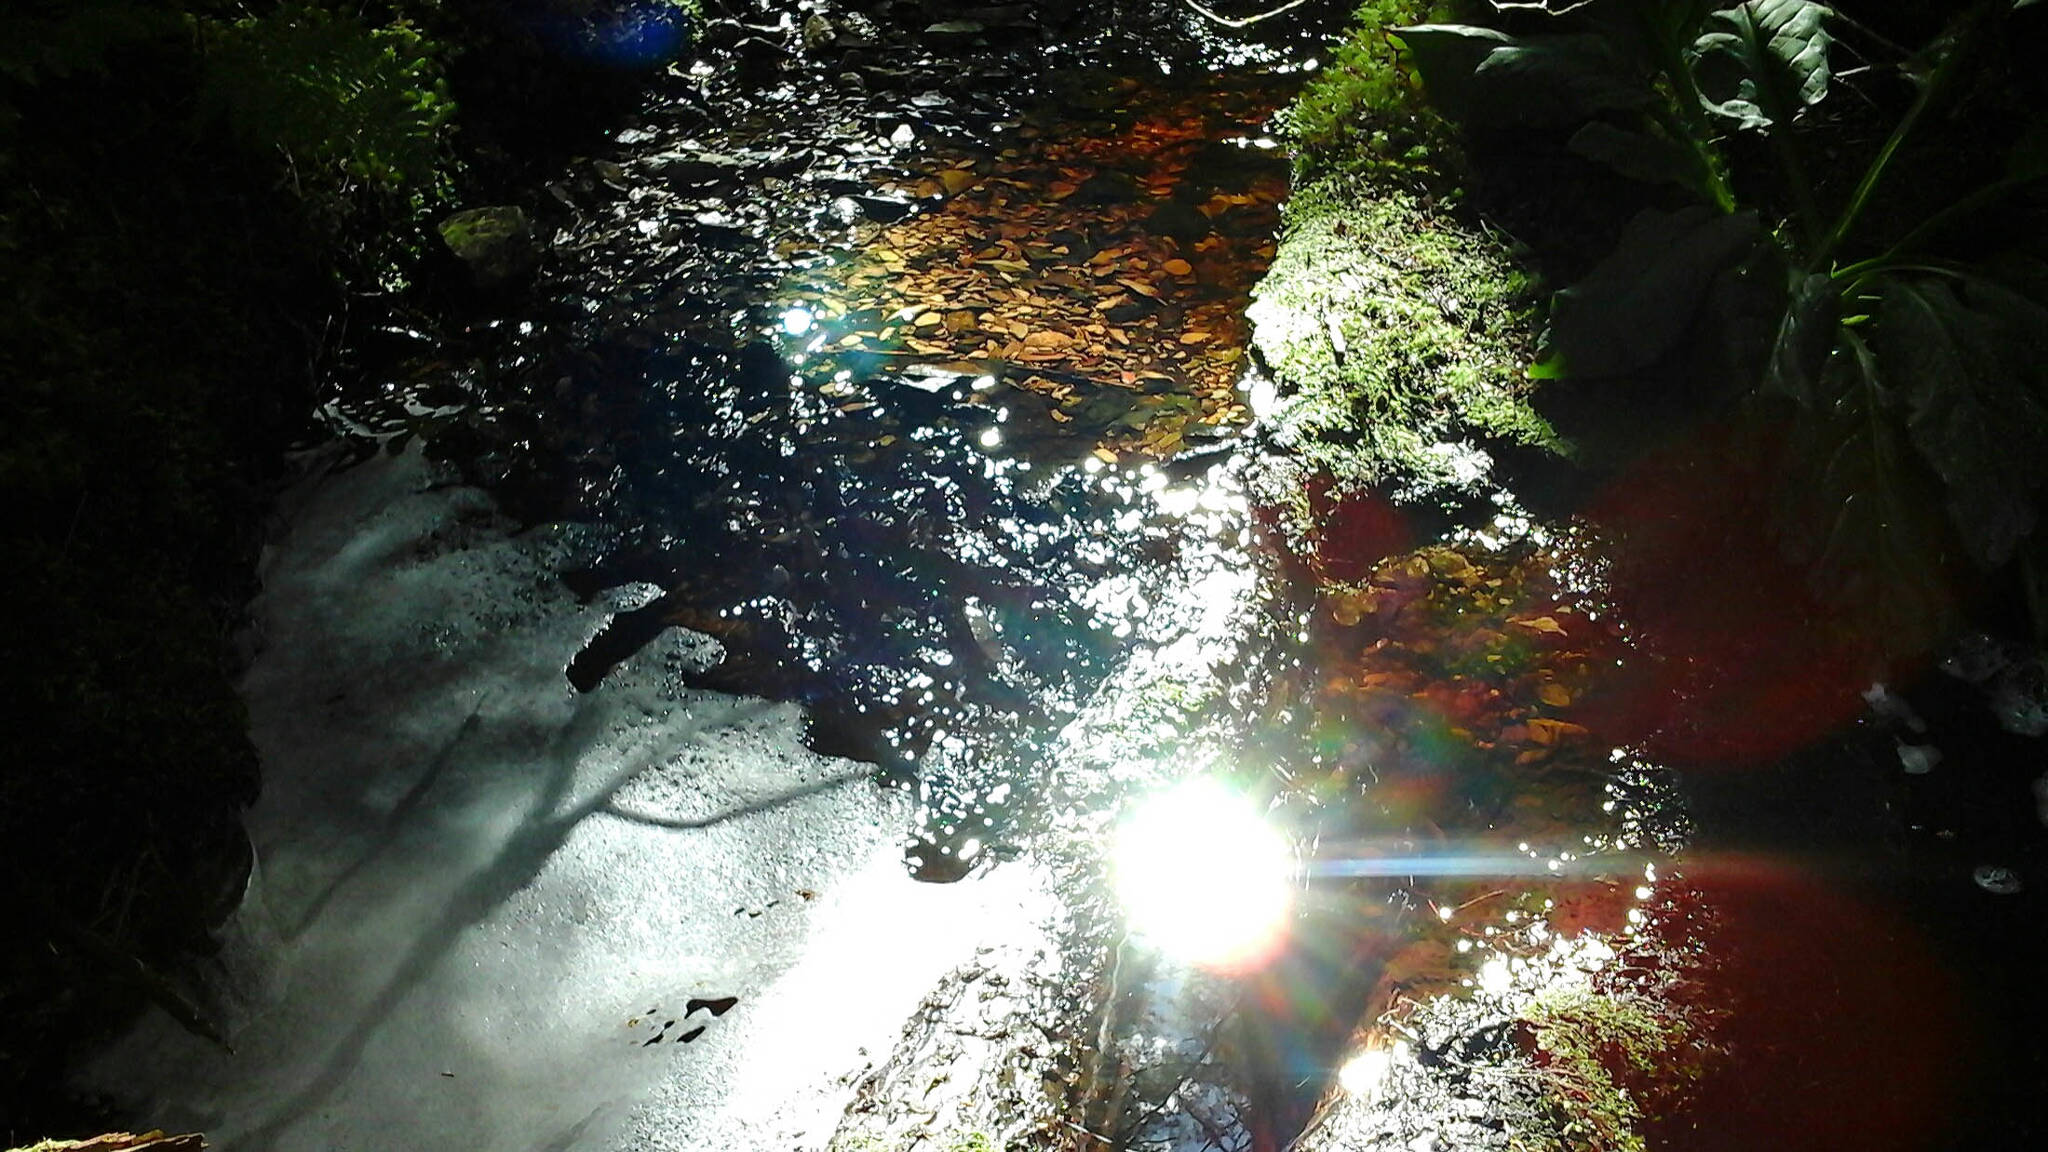 The sun is reflected in a forest stream. Photo by Tara Neilson | For the Capital City Weekly